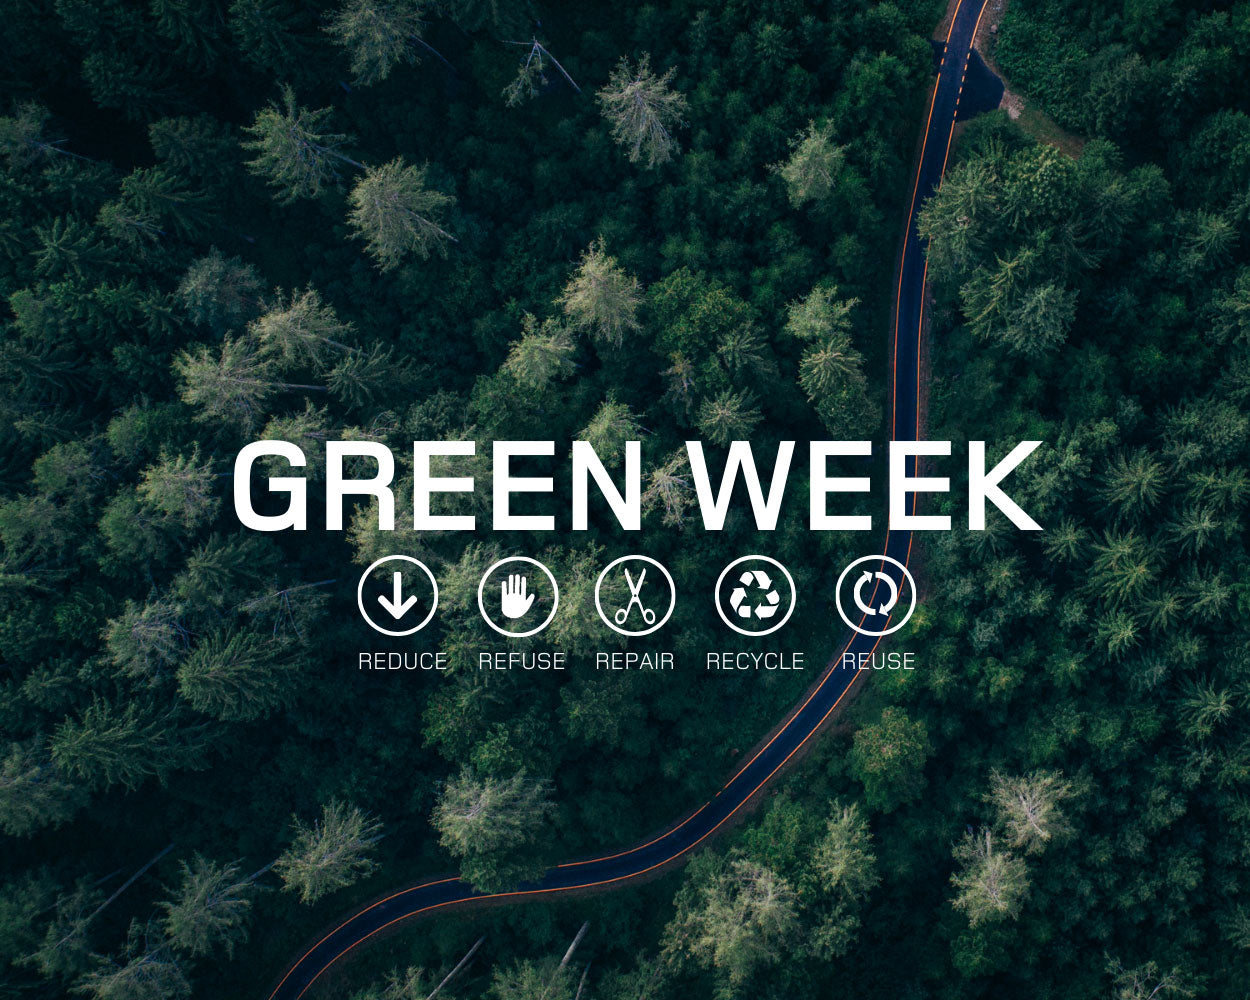 Choose to have a green week and not a black one